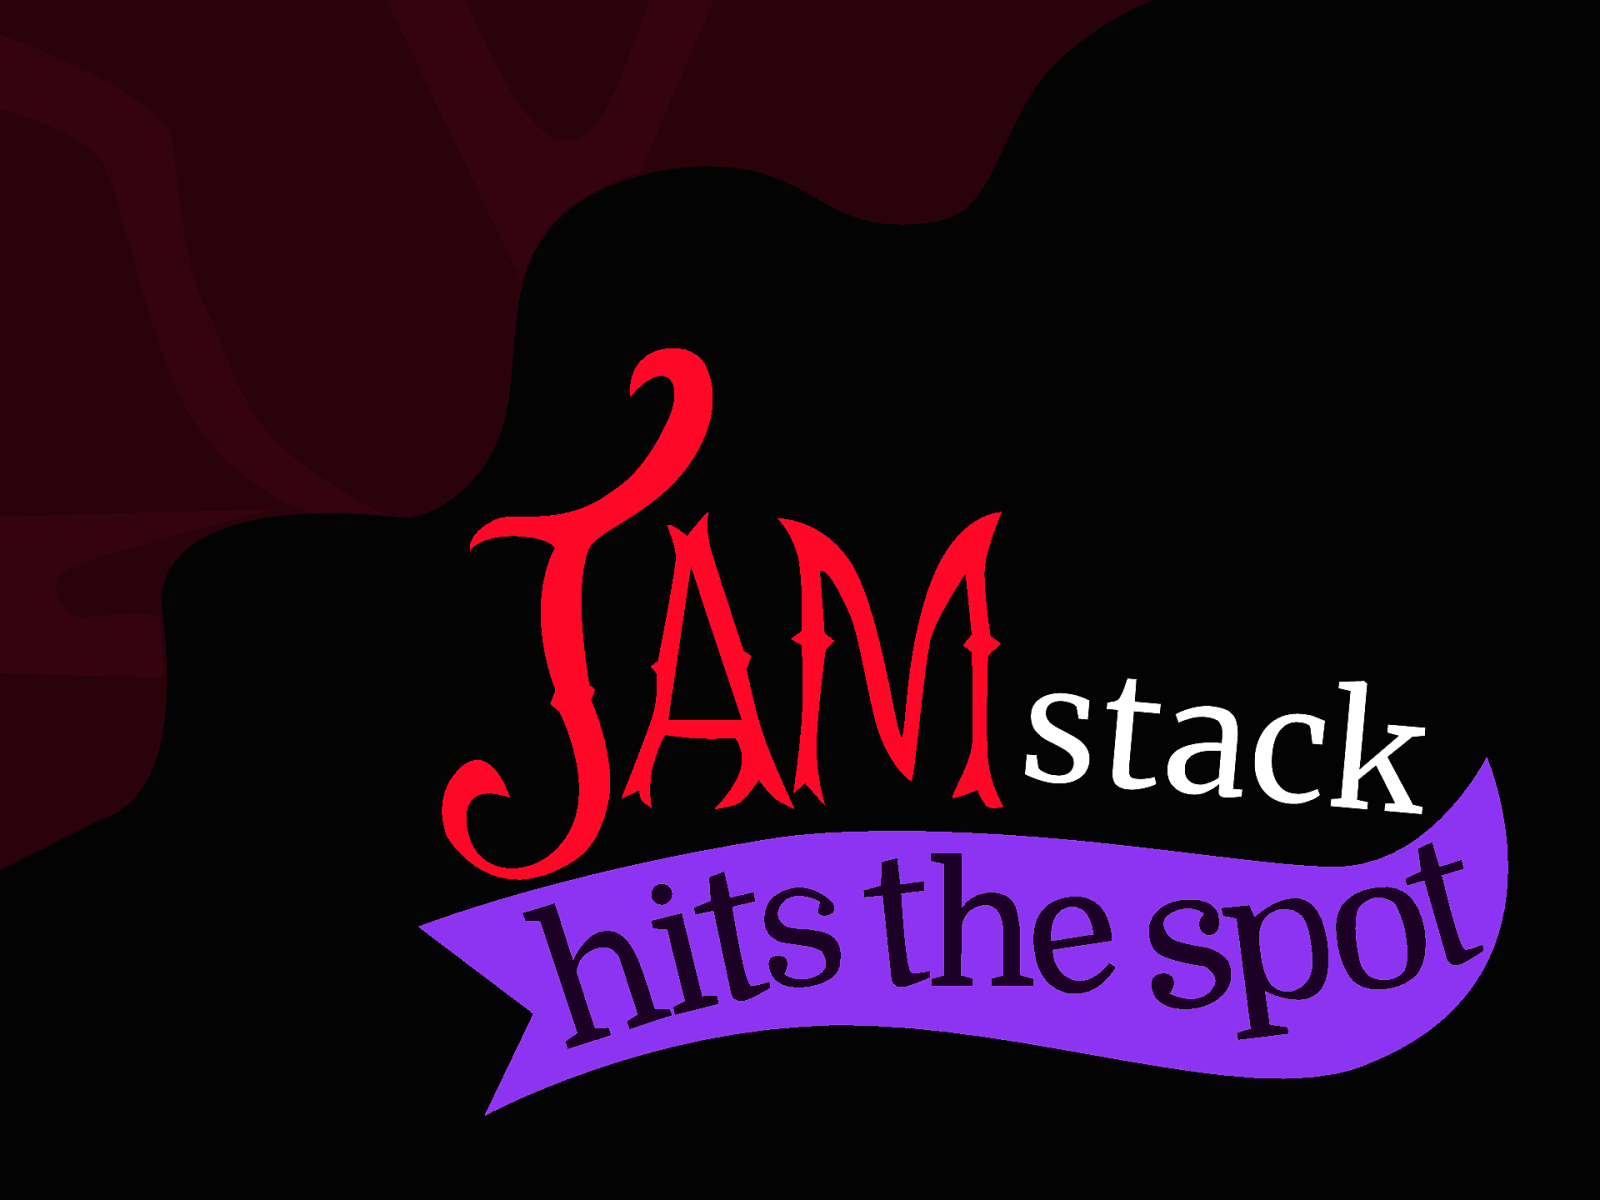 Jamstack hits the spot